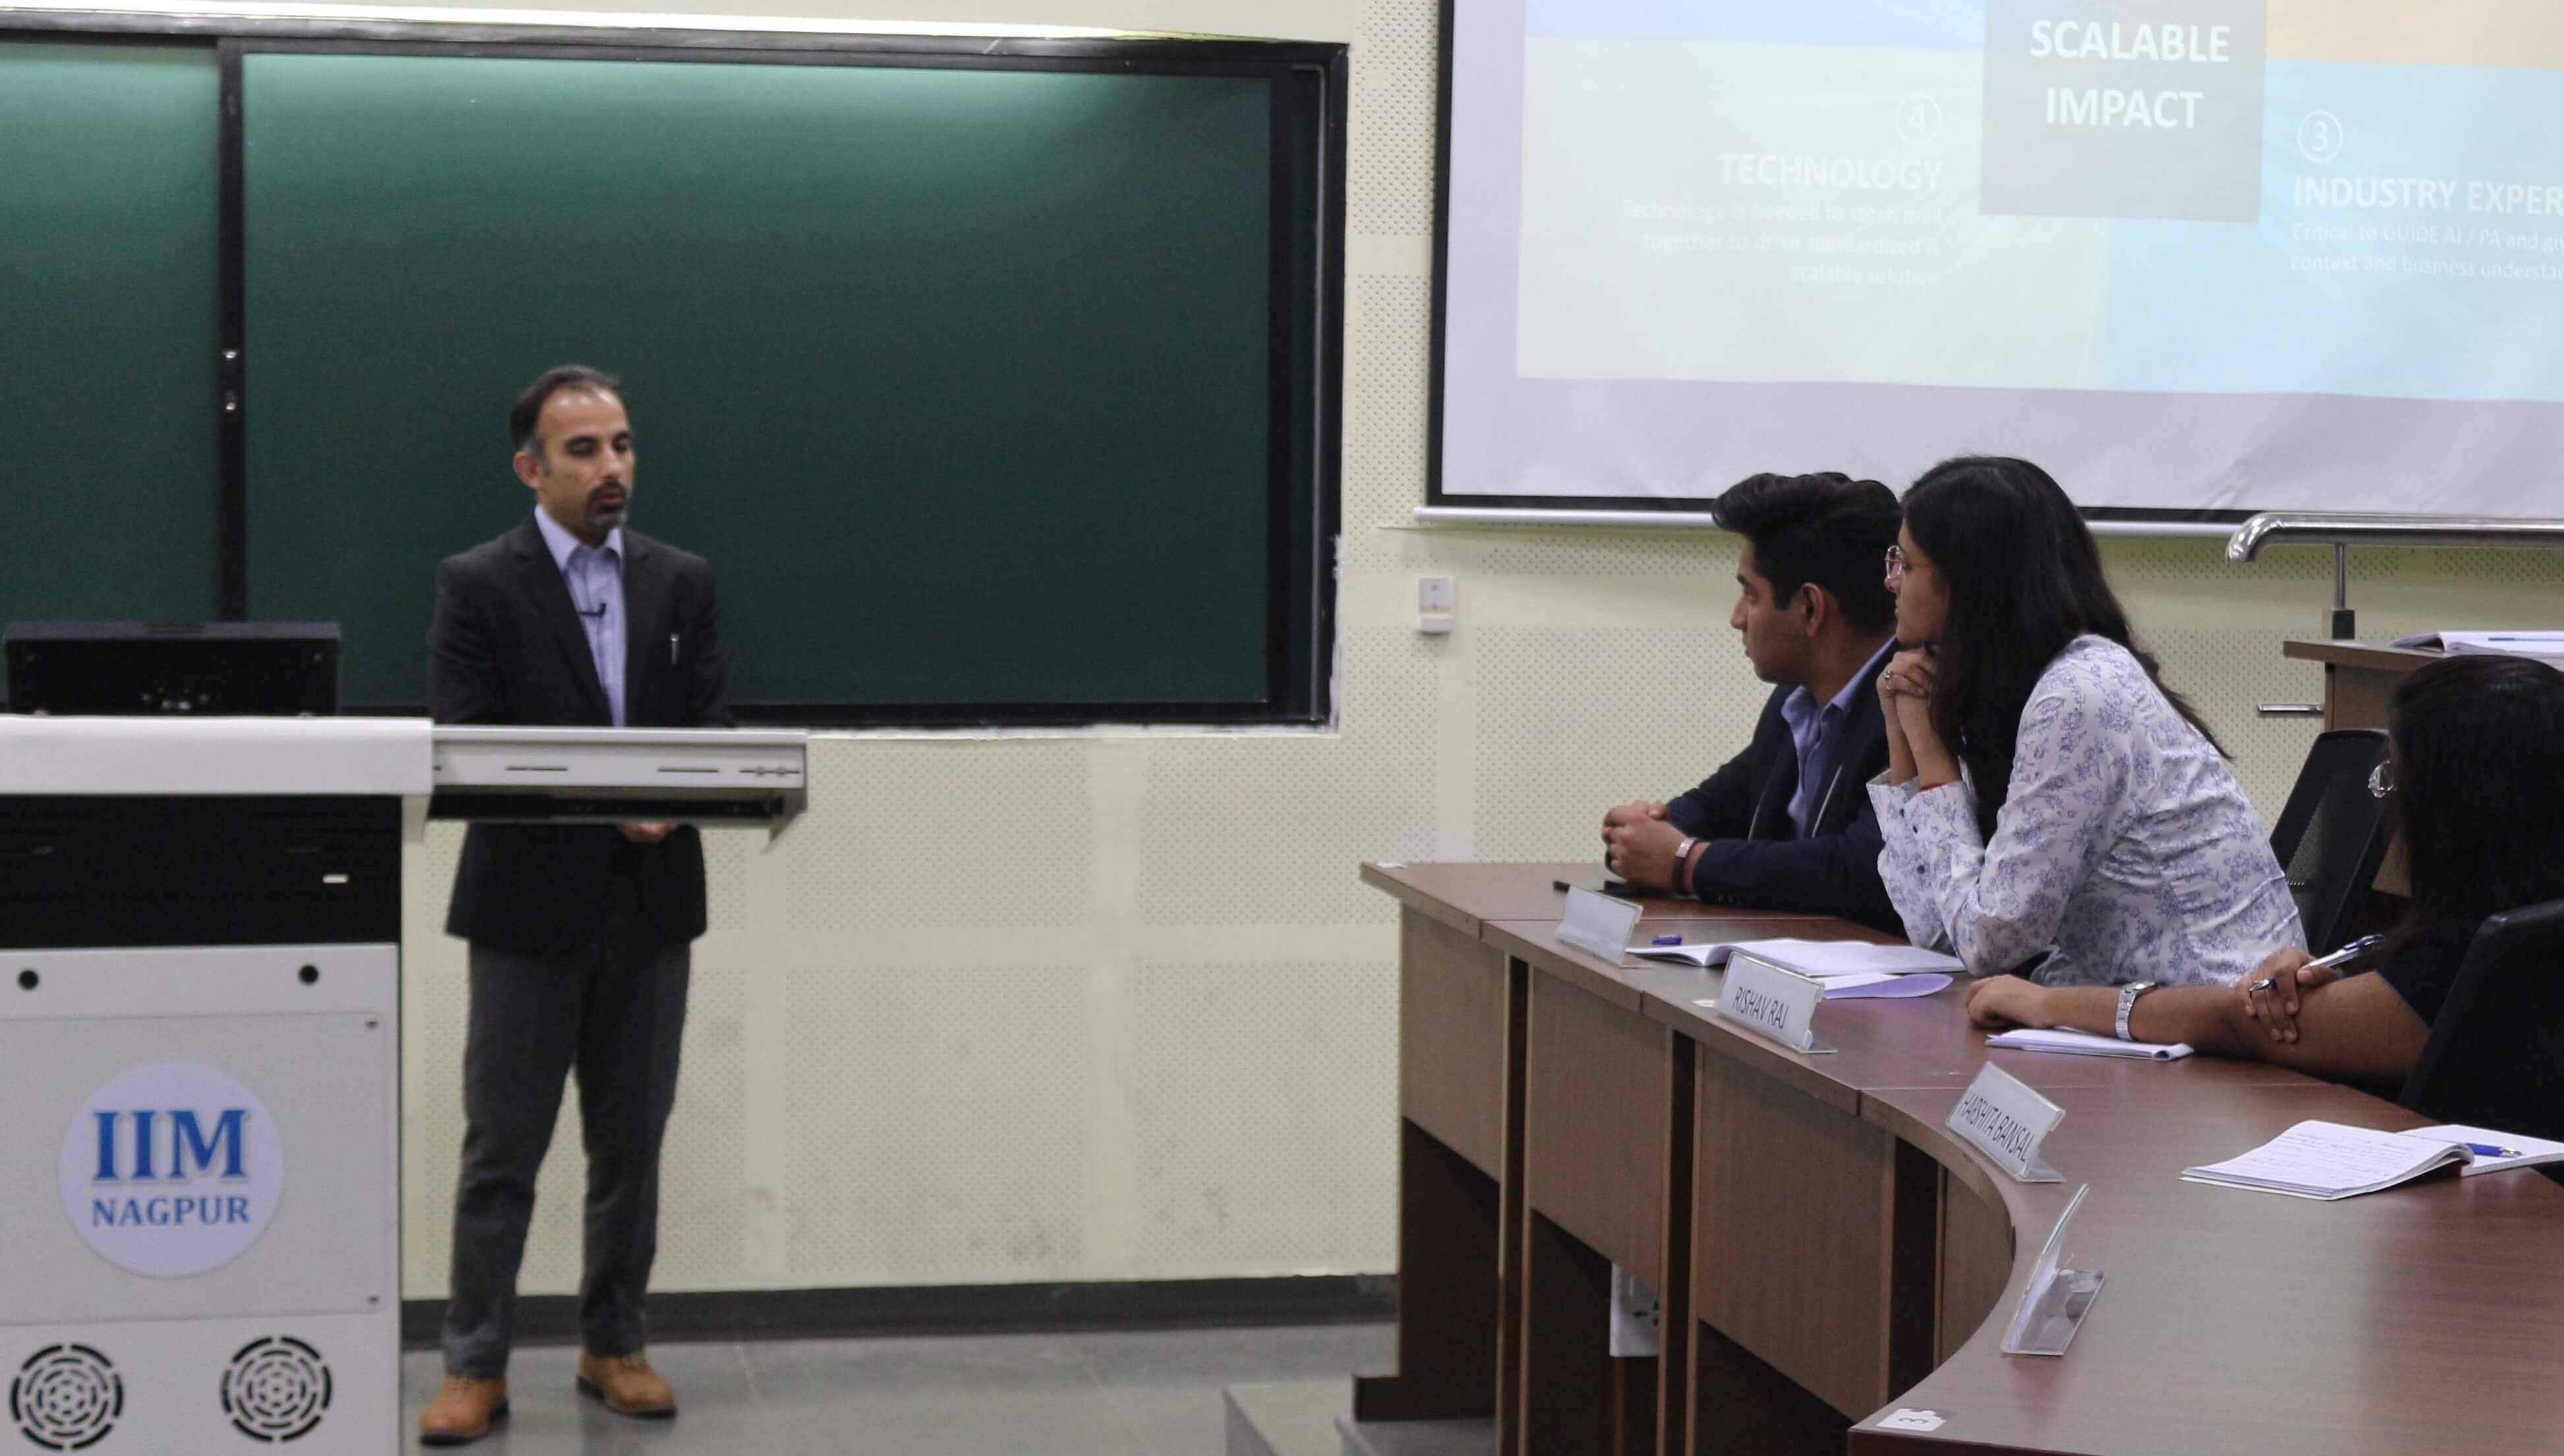 Guest Session by Mr. Imran Saeed